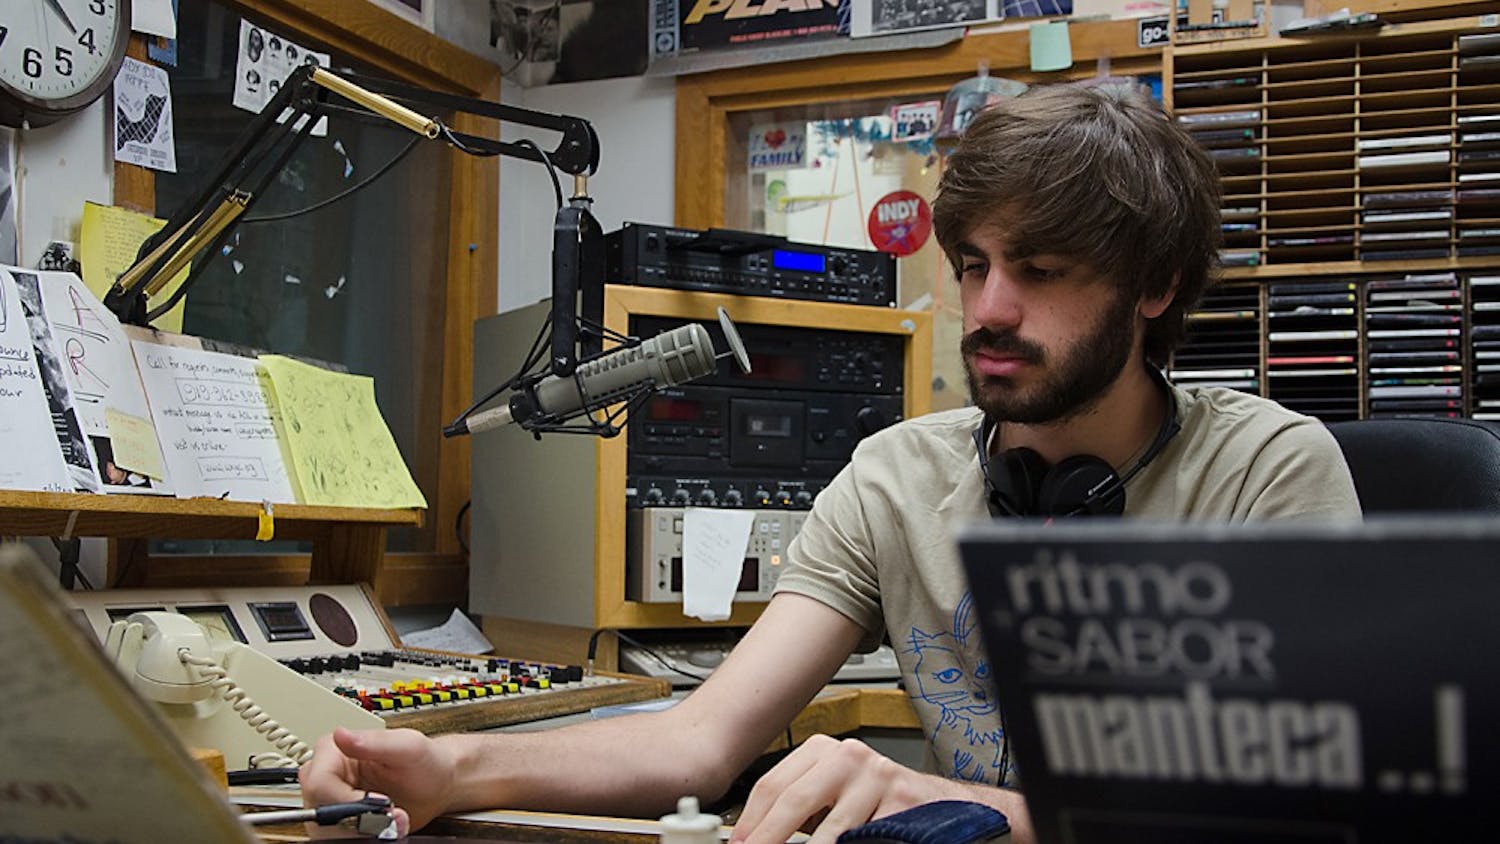 Grant Bisher, a junior German and comparative literature major, has worked at WXYC since his first semester at UNC.